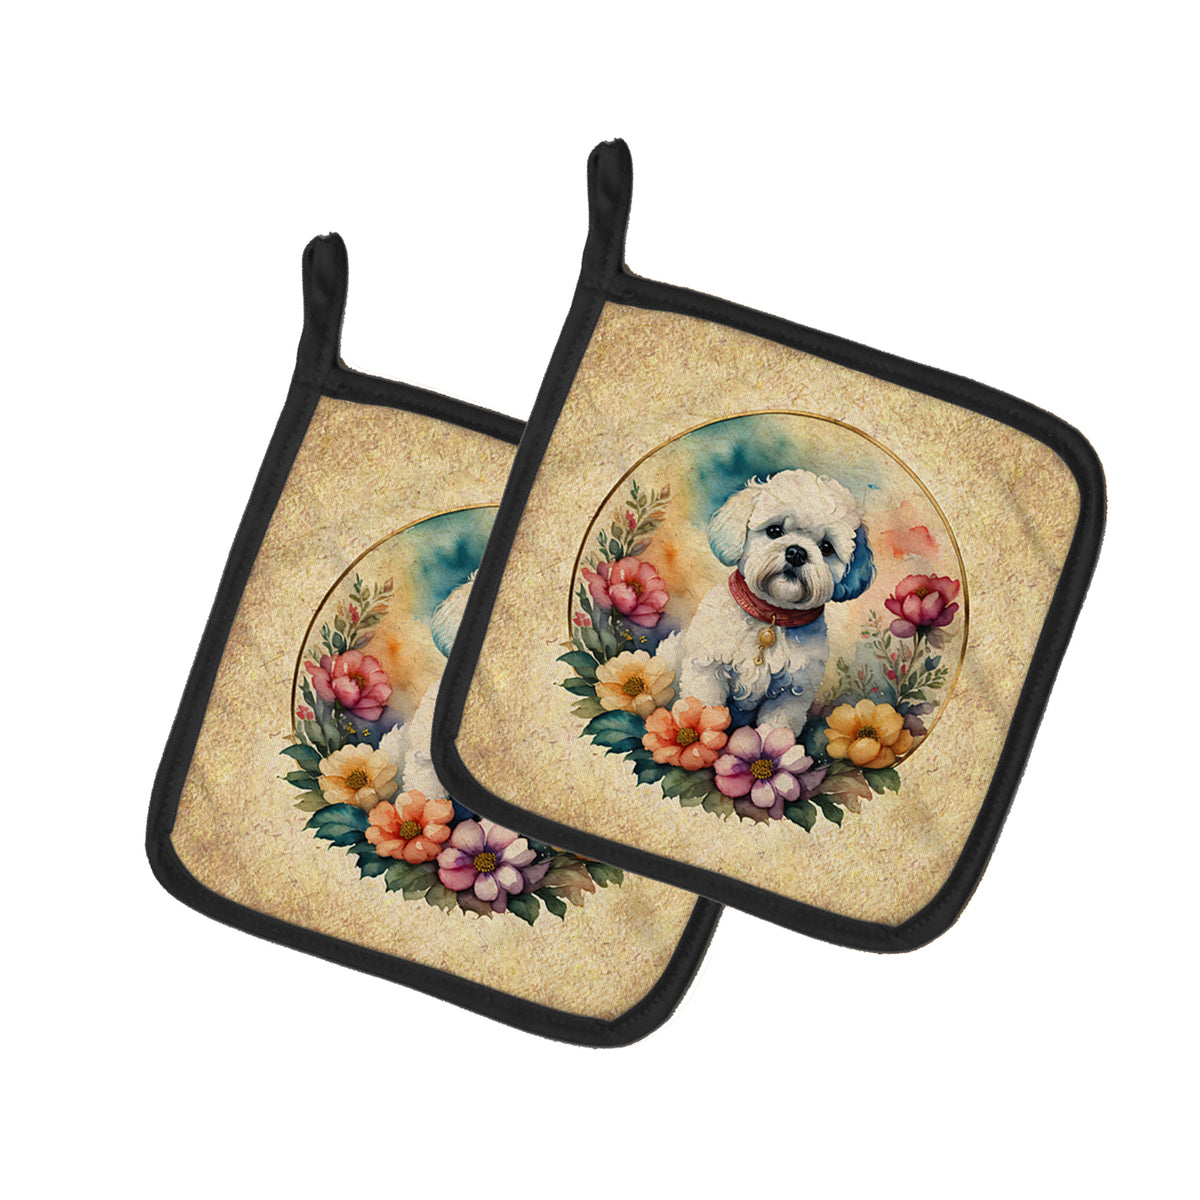 Buy this Bichon Frise and Flowers Pair of Pot Holders